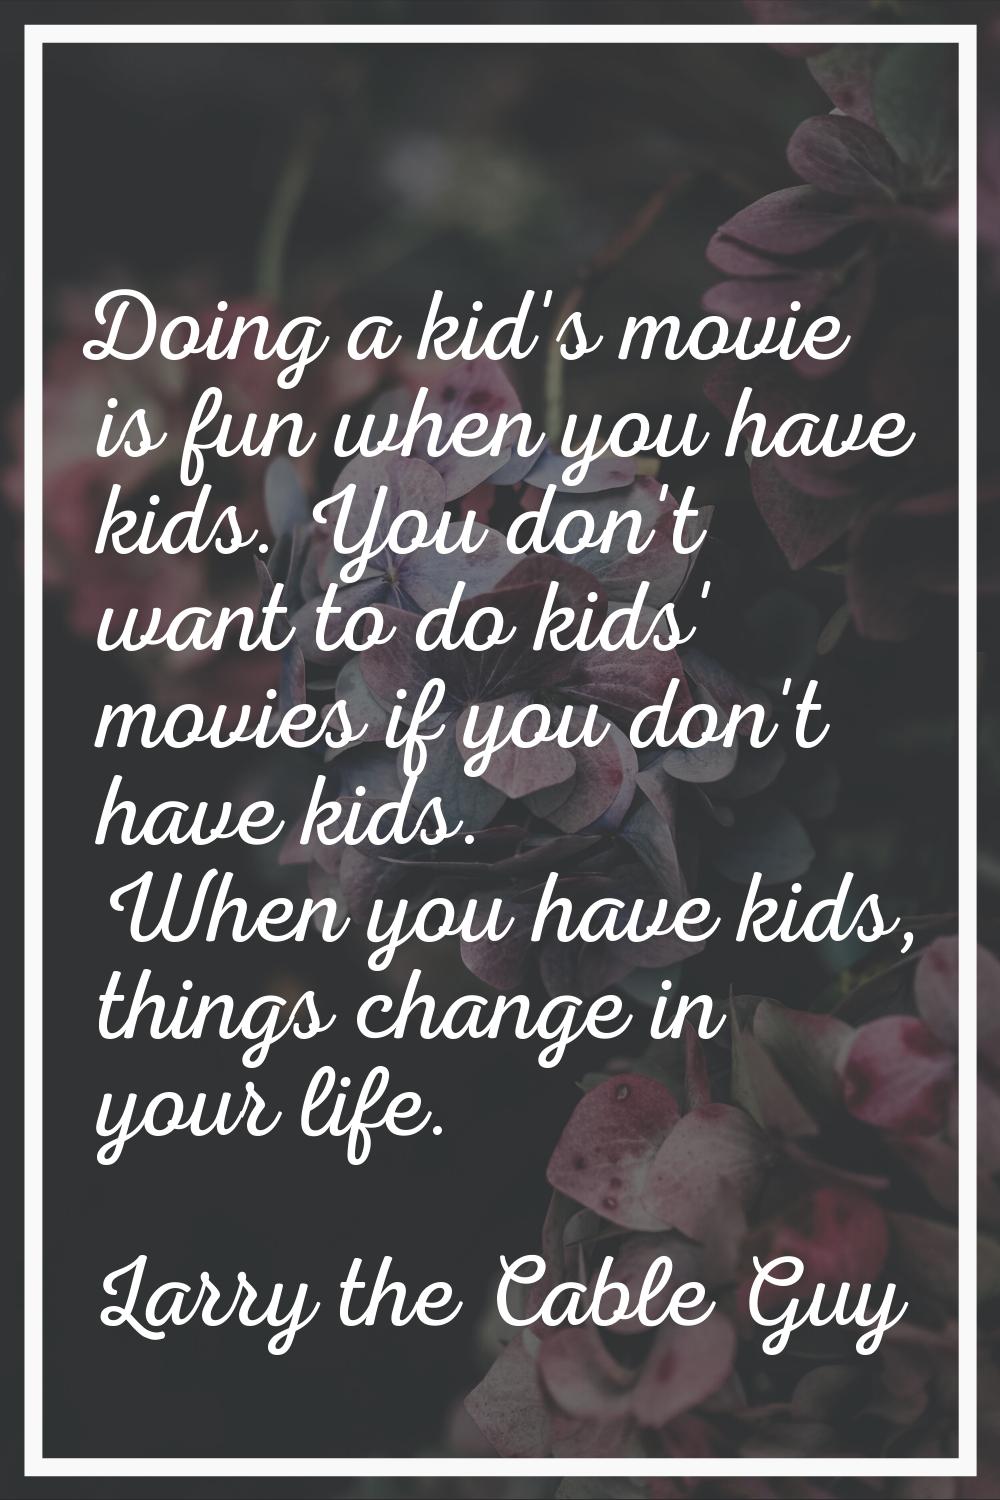 Doing a kid's movie is fun when you have kids. You don't want to do kids' movies if you don't have 